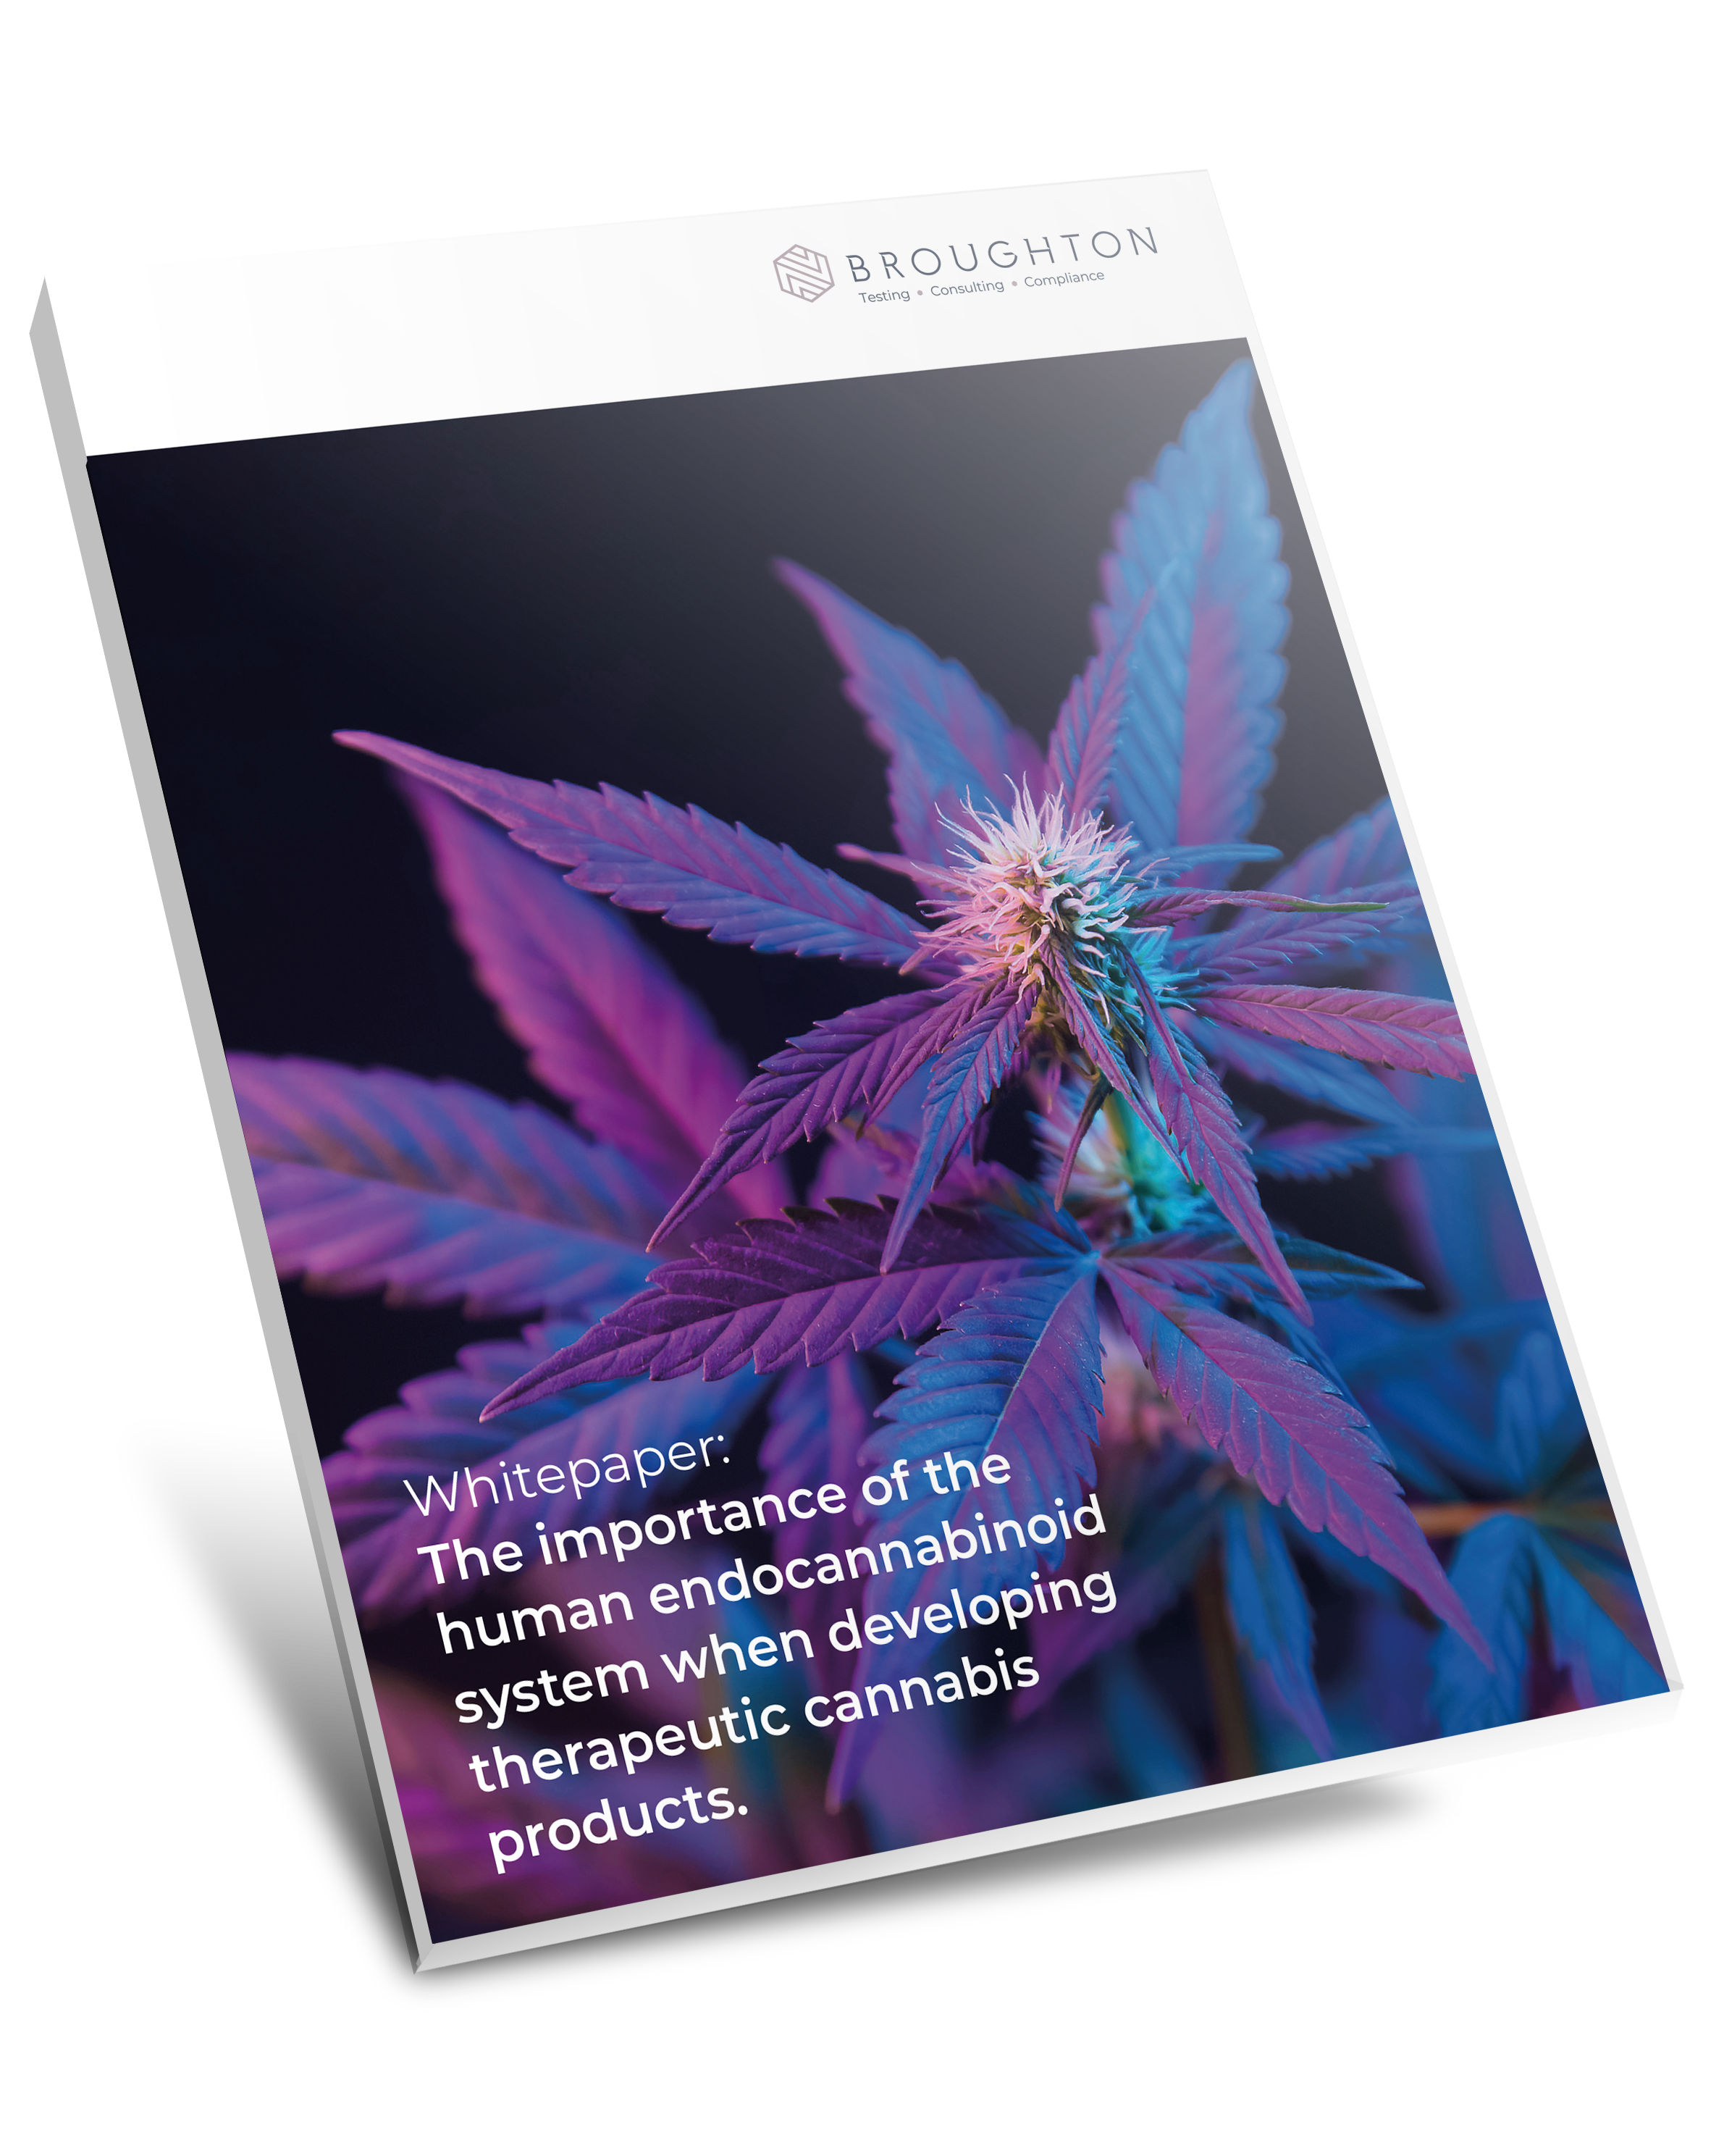 Whitepaper:-The-importance-of-the-human-endocannabinoid-system-when-developing-therapeutic-cannabis-products